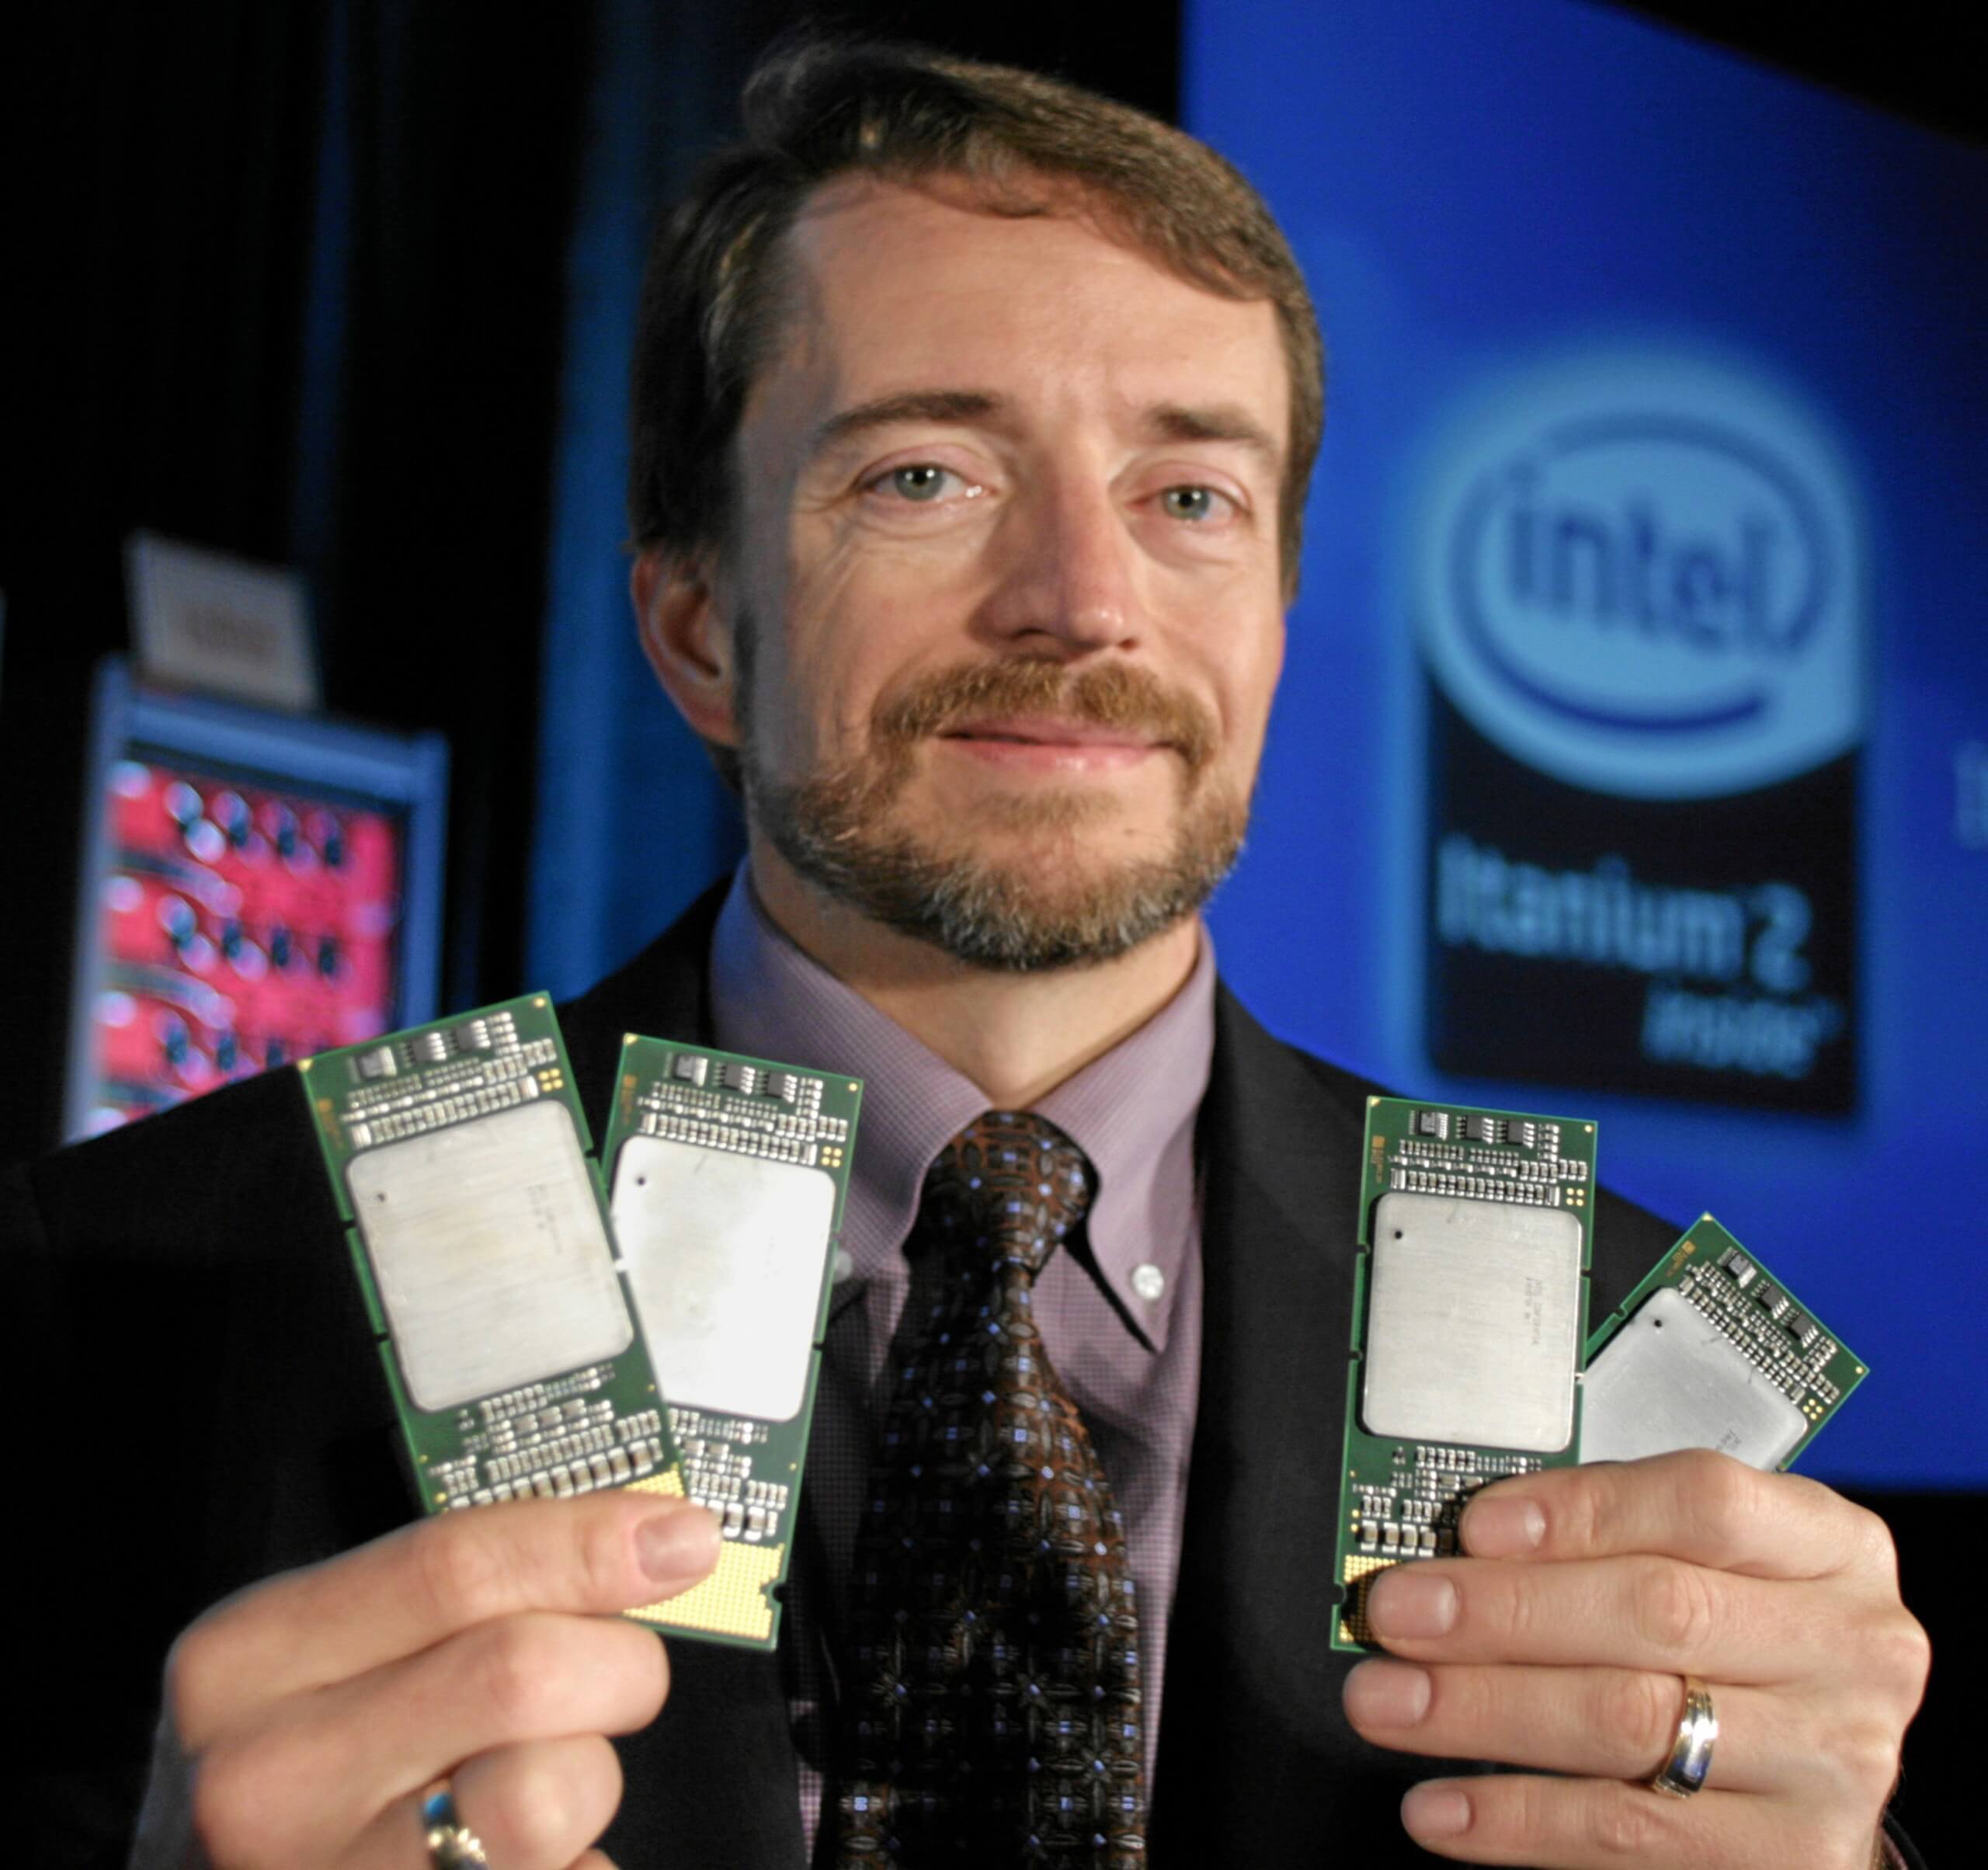 Intel finally quits making their Itanium server chips